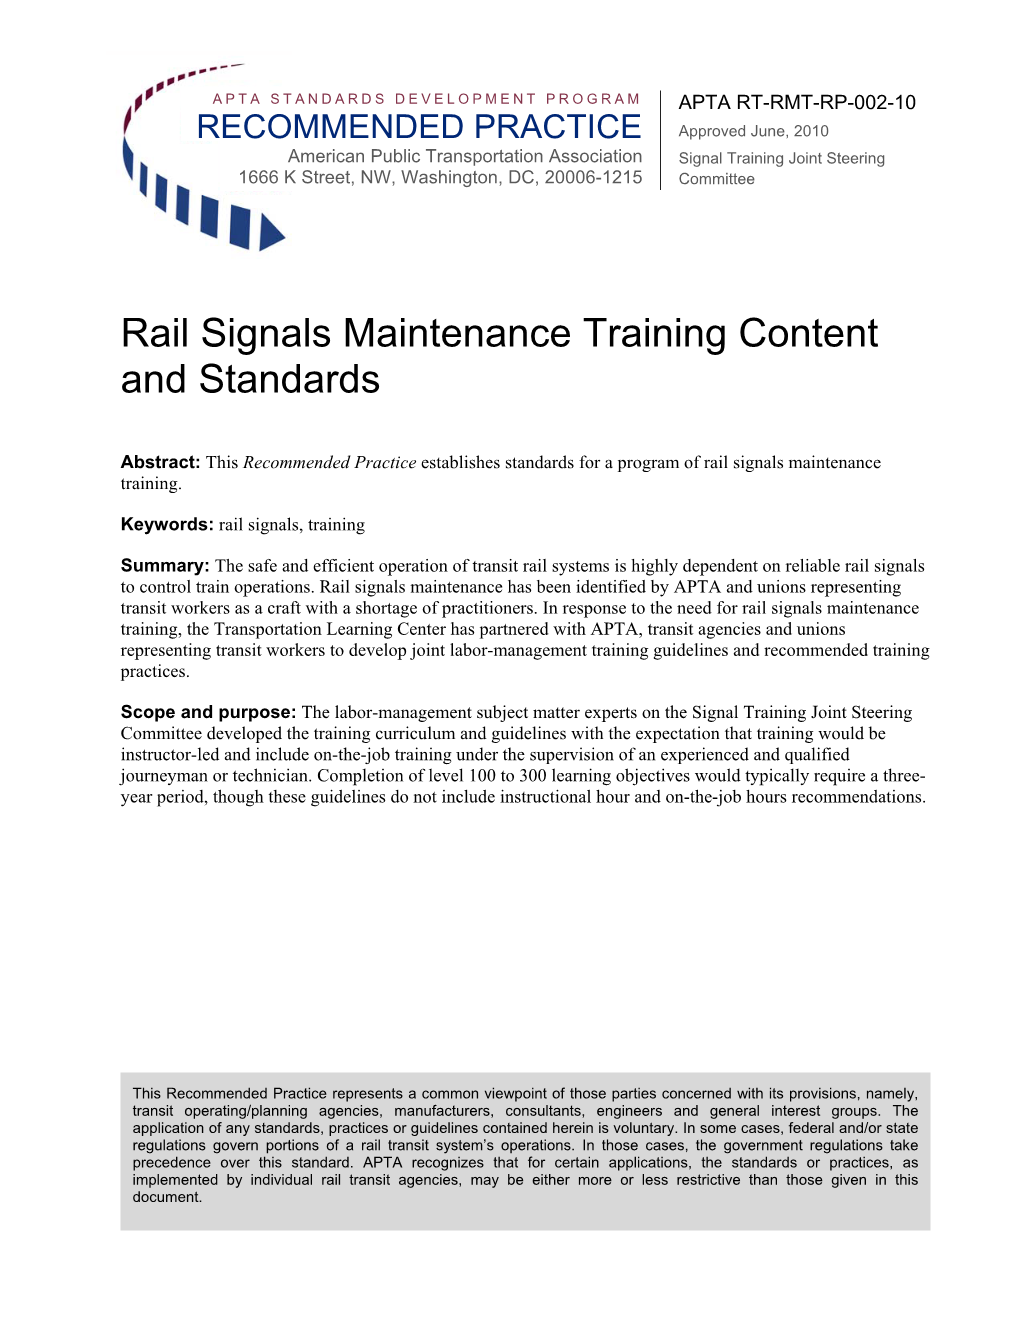 Rail Signals Maintenance Training Content and Standards